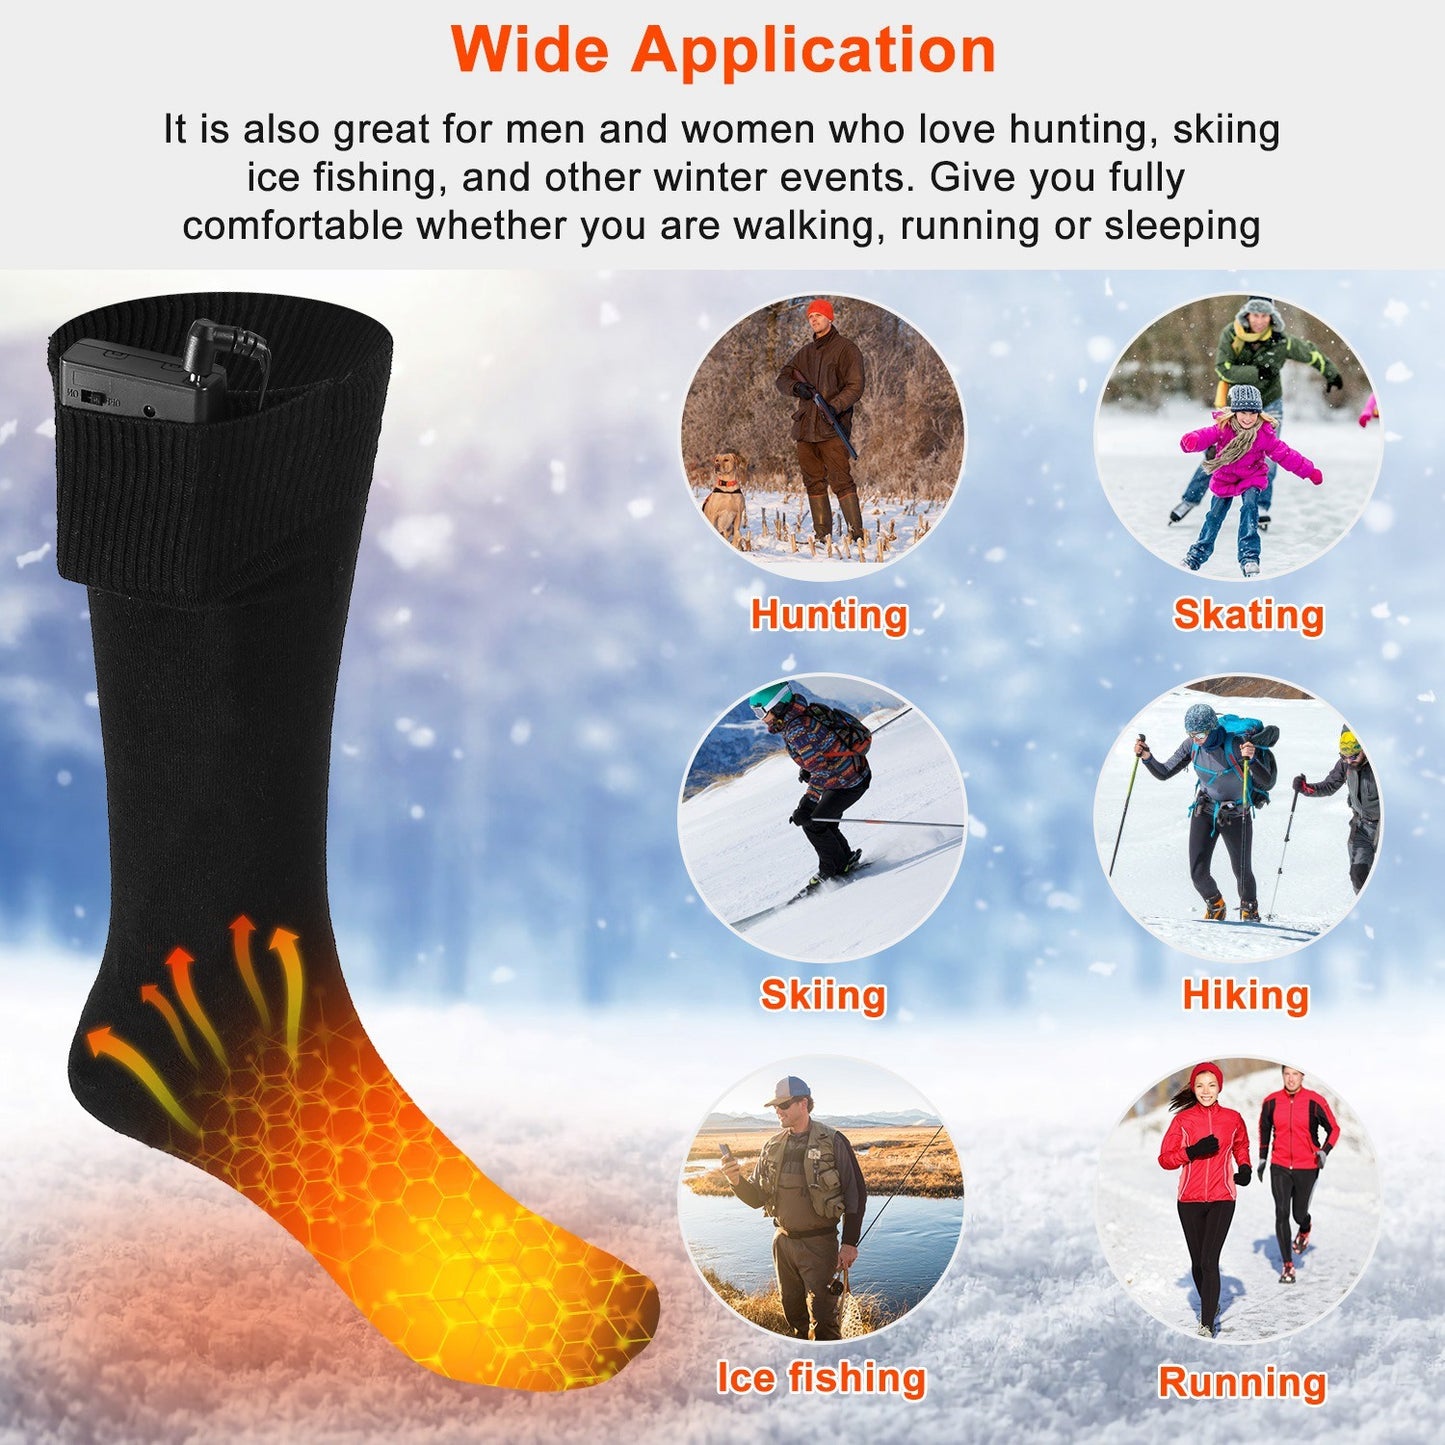 Unisex Electric Heated Socks with Rechargeable Battery